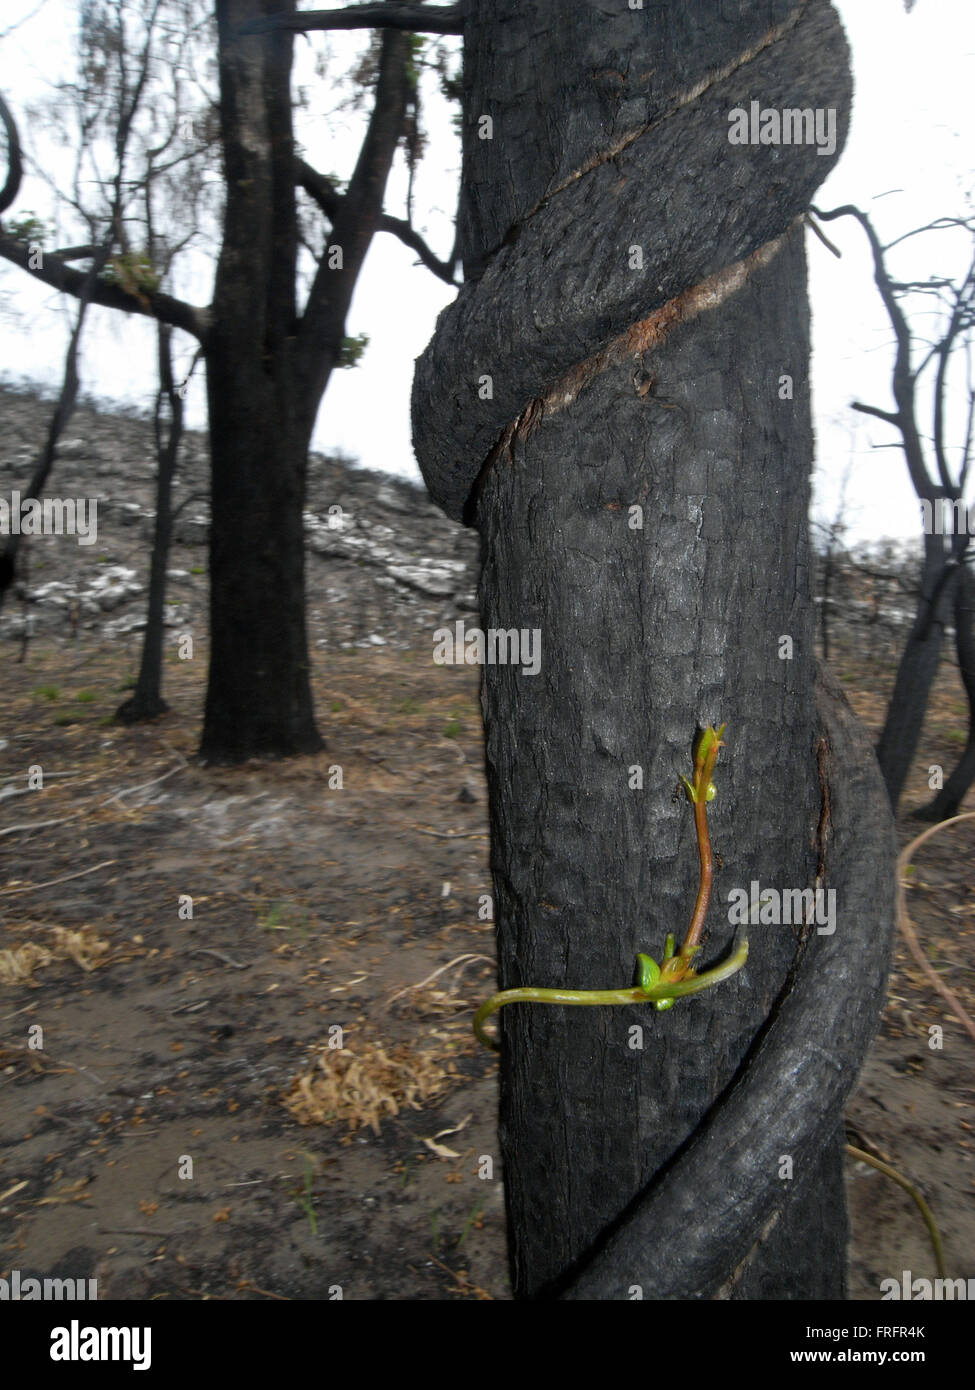 Preston Beach, southwest Western Australia - 22 March 2016 - Tiny green shoots of a native vine (possibly Hardenbergia) twine around blackened tree trunks. Early signs of regrowth after the devastating January 2016 bushfires are starting to be seen in some of the Australian native forest ecosystems in the region following recent rains. Credit:  Suzanne Long/Alamy Live News Stock Photo